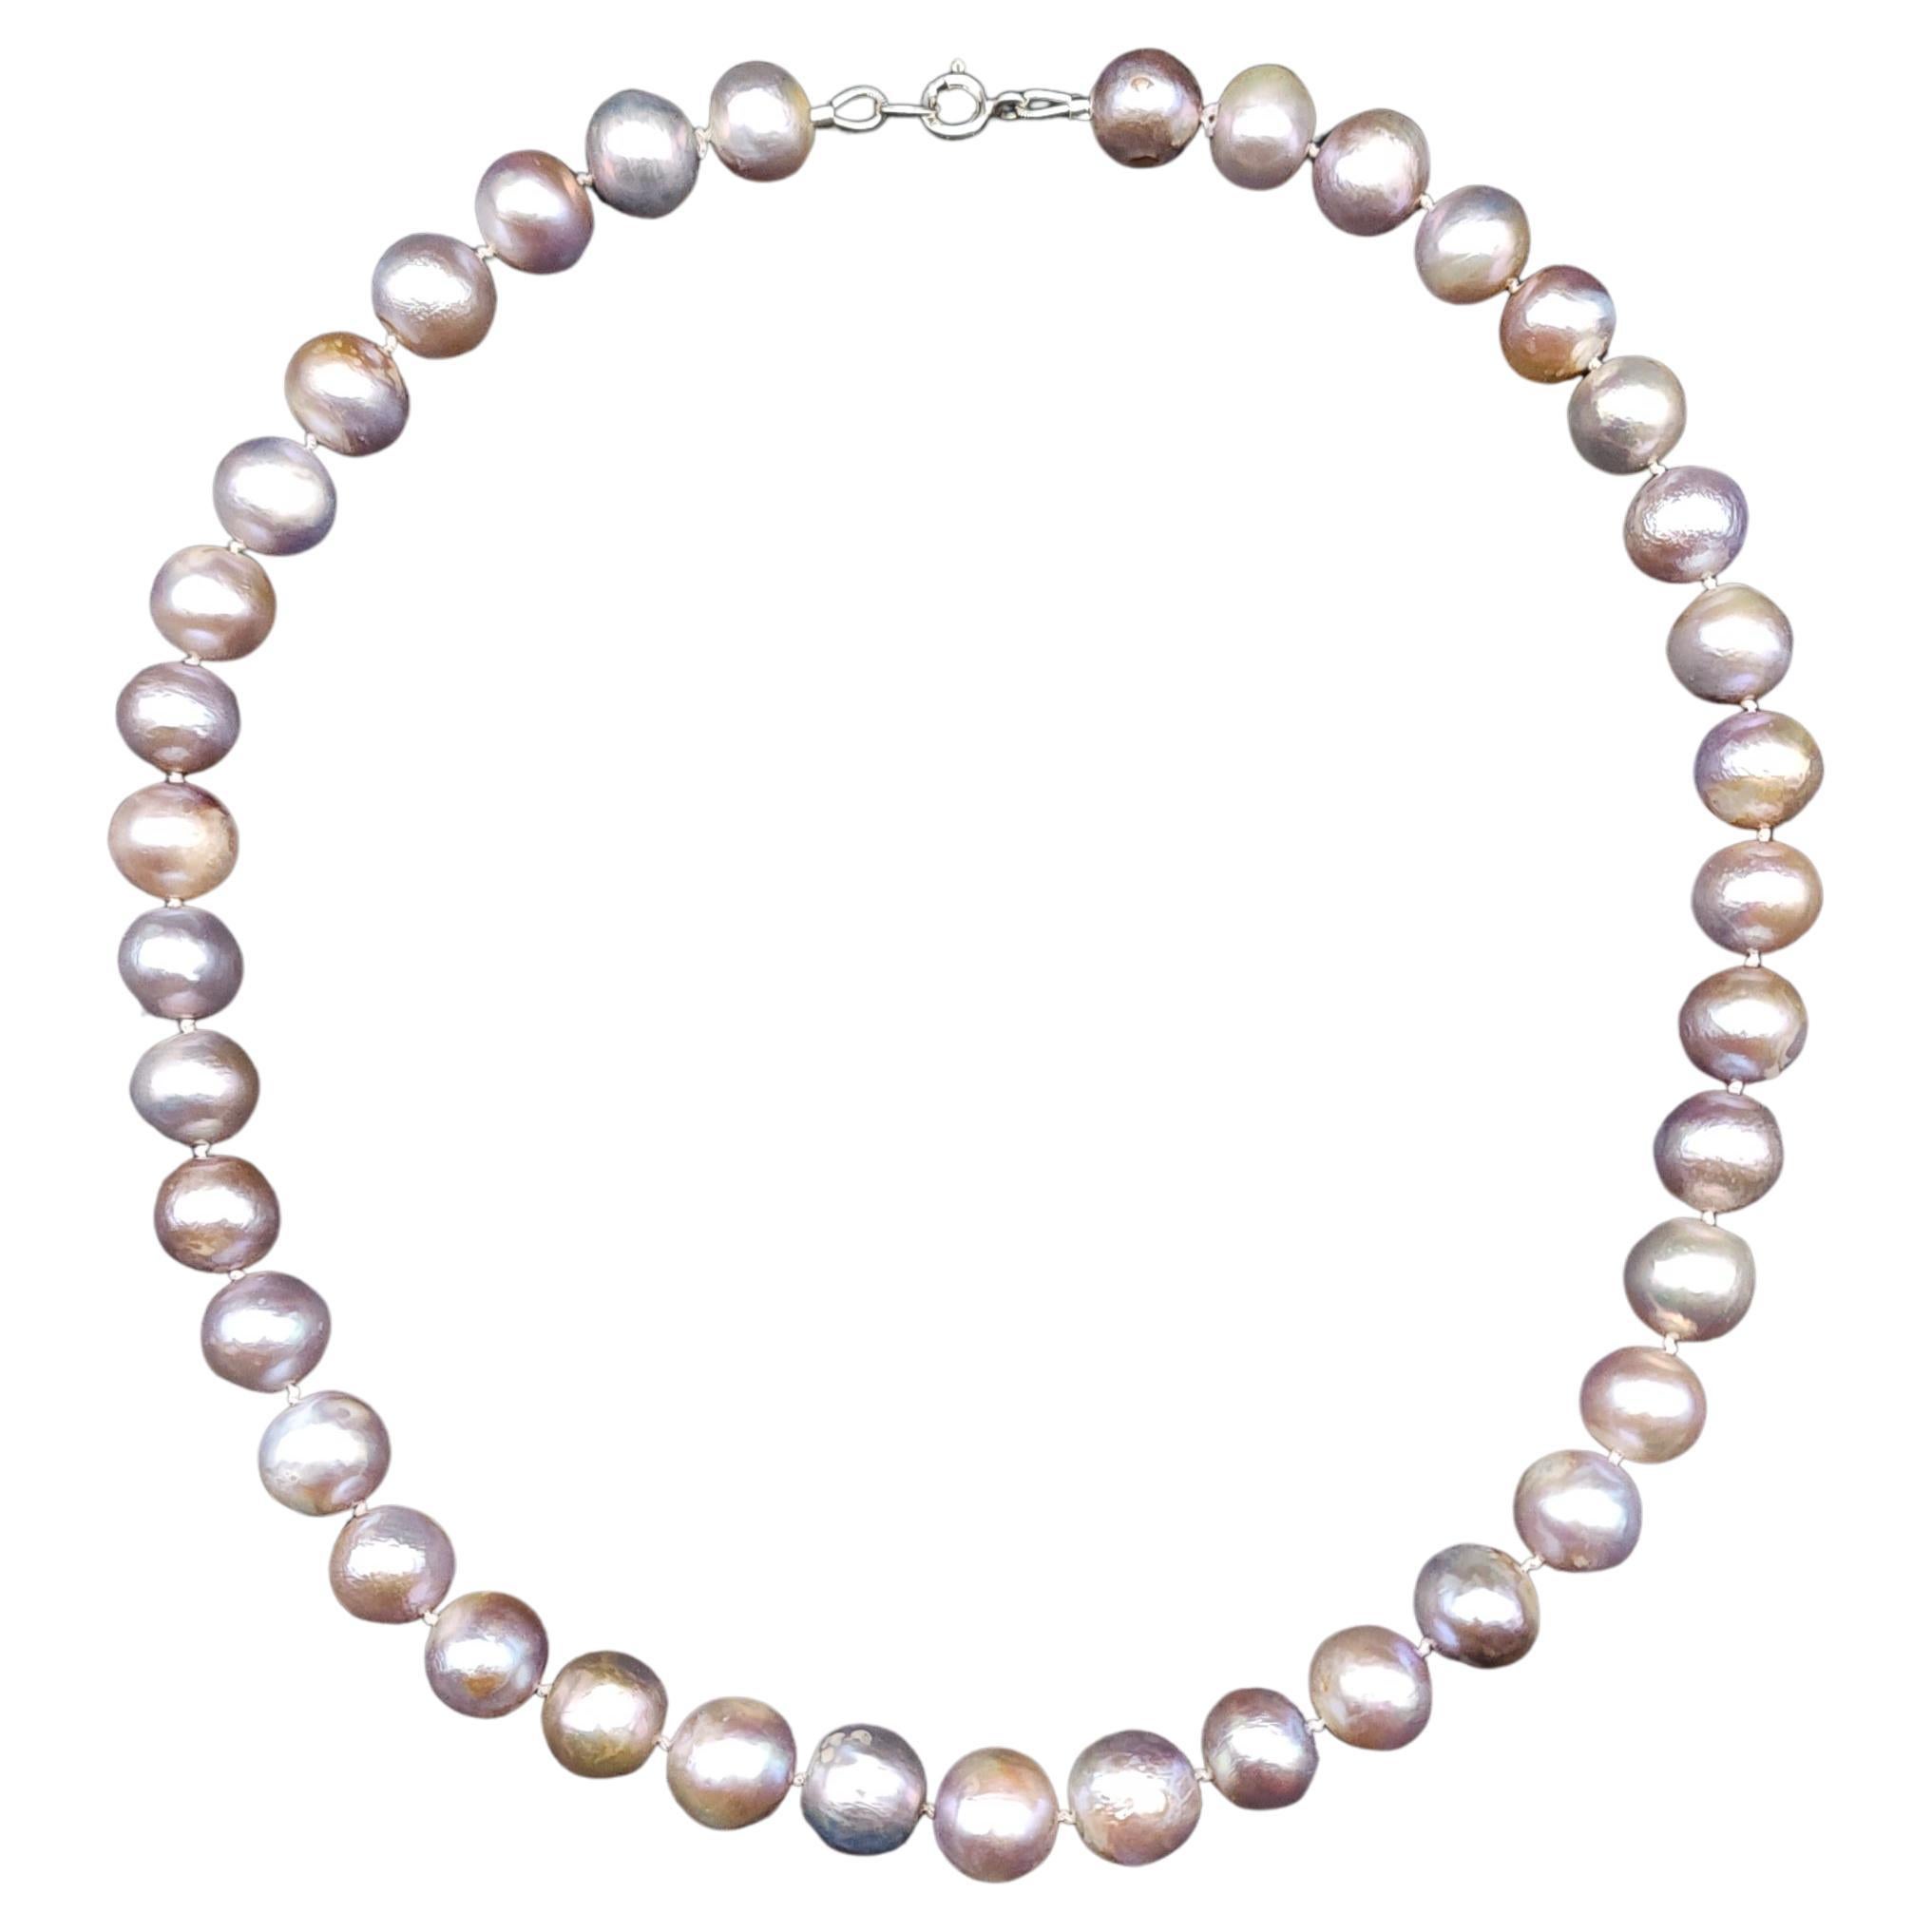 How can you tell a vintage pearl necklace?